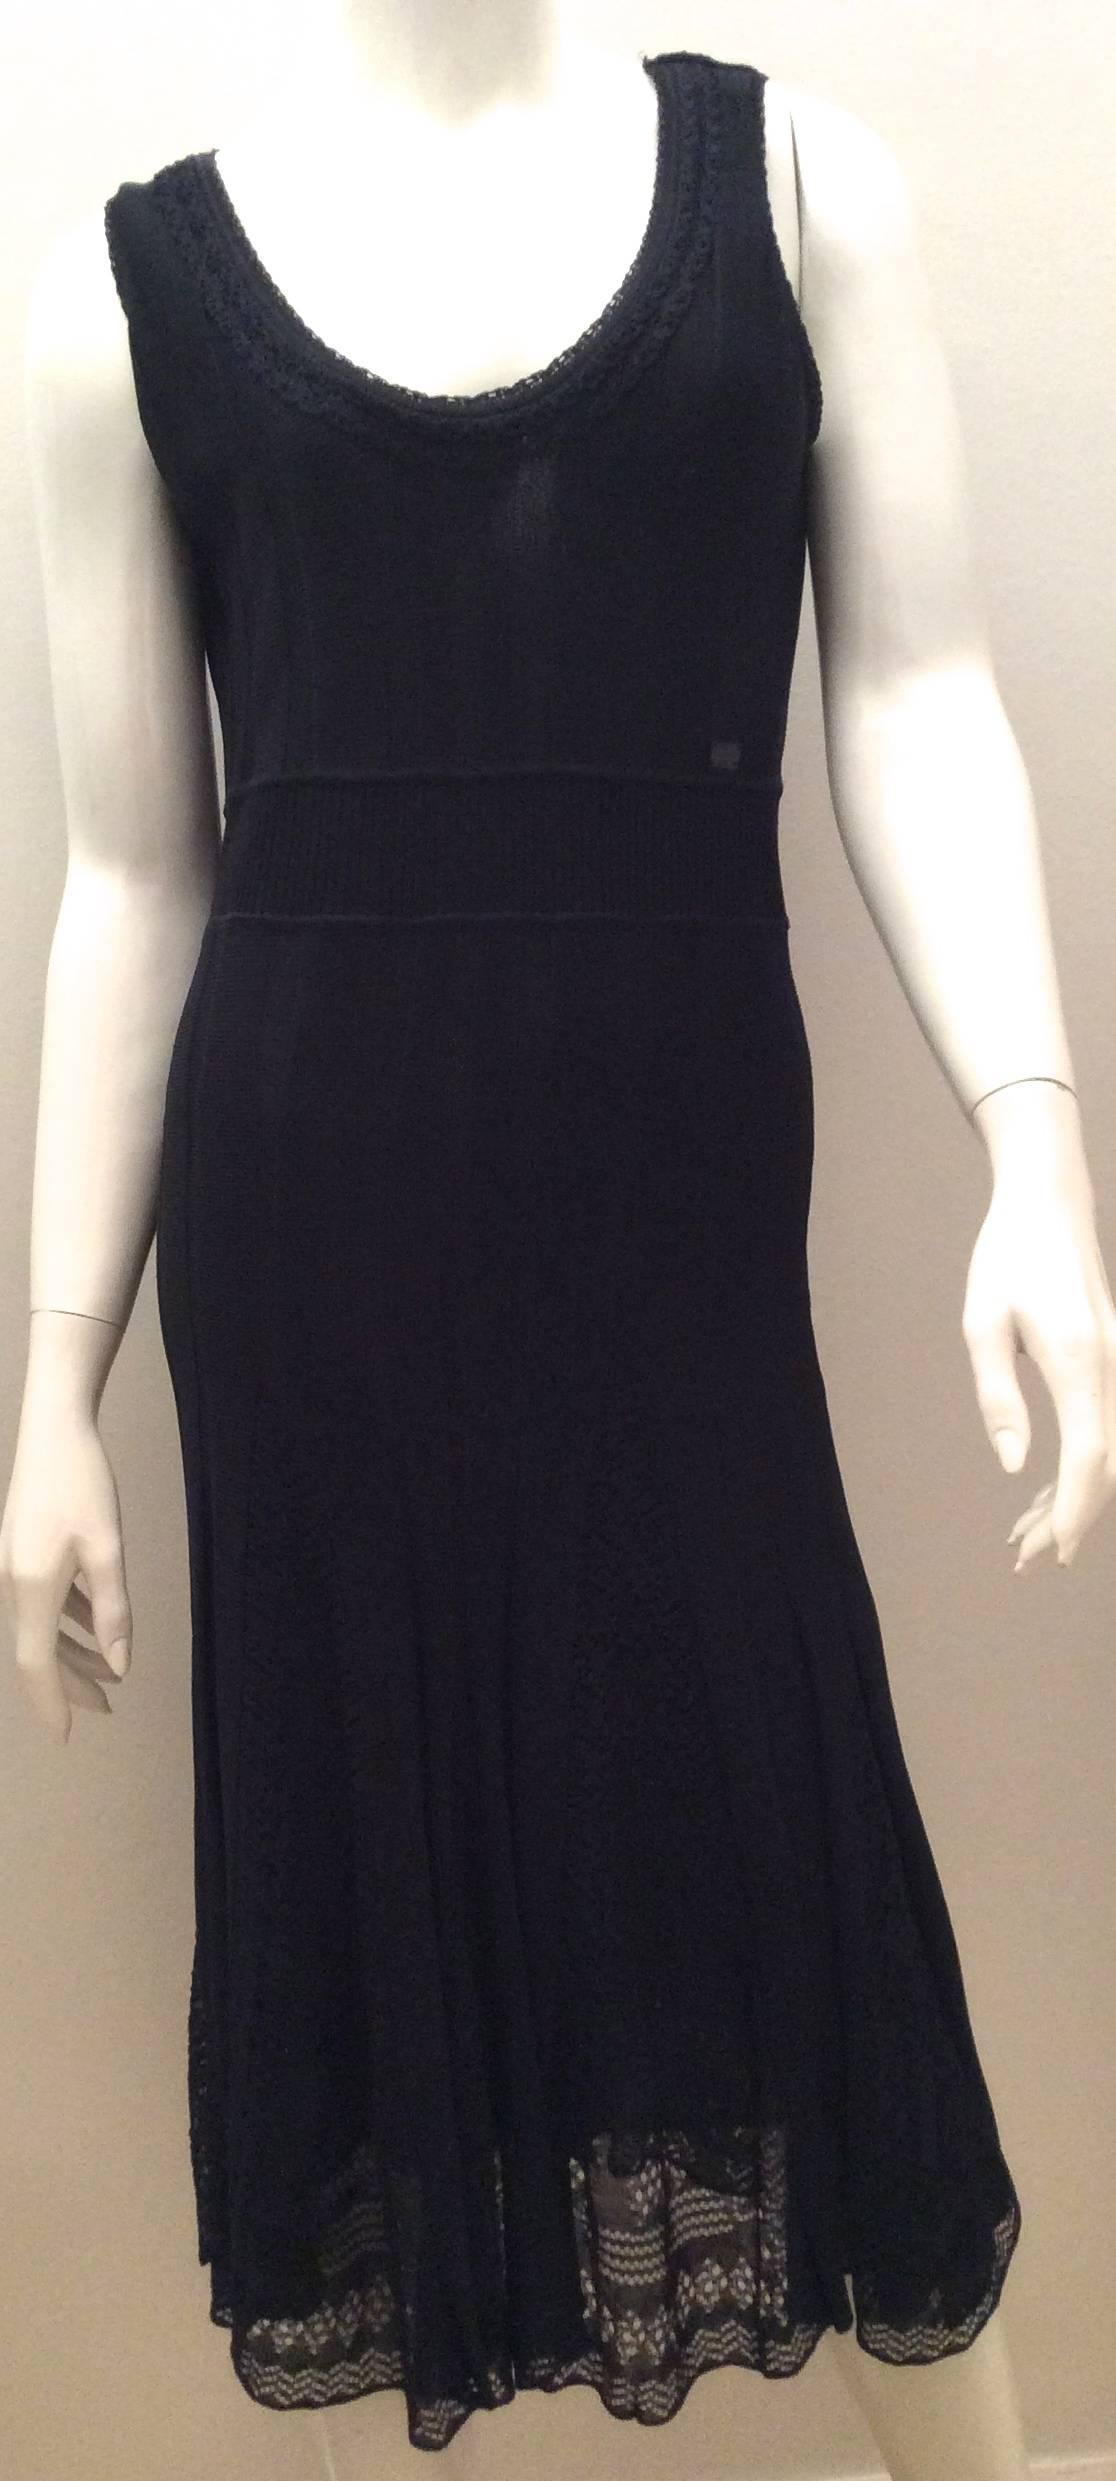 Presented here is a magnificent navy knit Chanel dress that is extremely flattering. This sleeveless dress has stripes down the front and 2.5 inches of knit centerpiece with the black Chanel logo on the top of the inch piece spelling out Chanel,